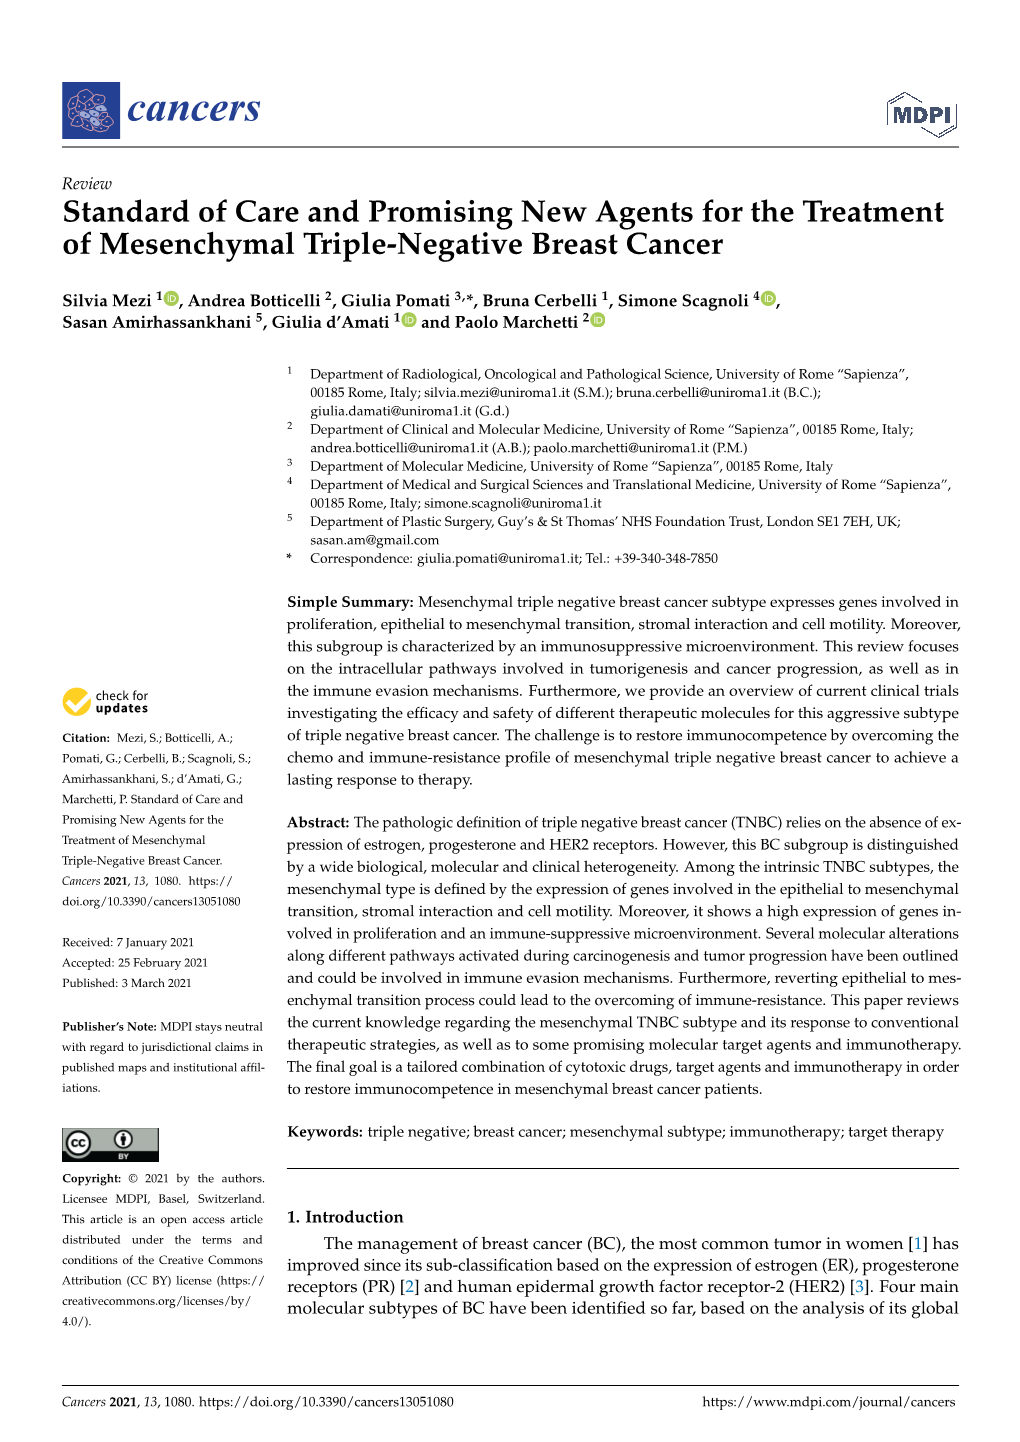 Standard of Care and Promising New Agents for the Treatment of Mesenchymal Triple-Negative Breast Cancer